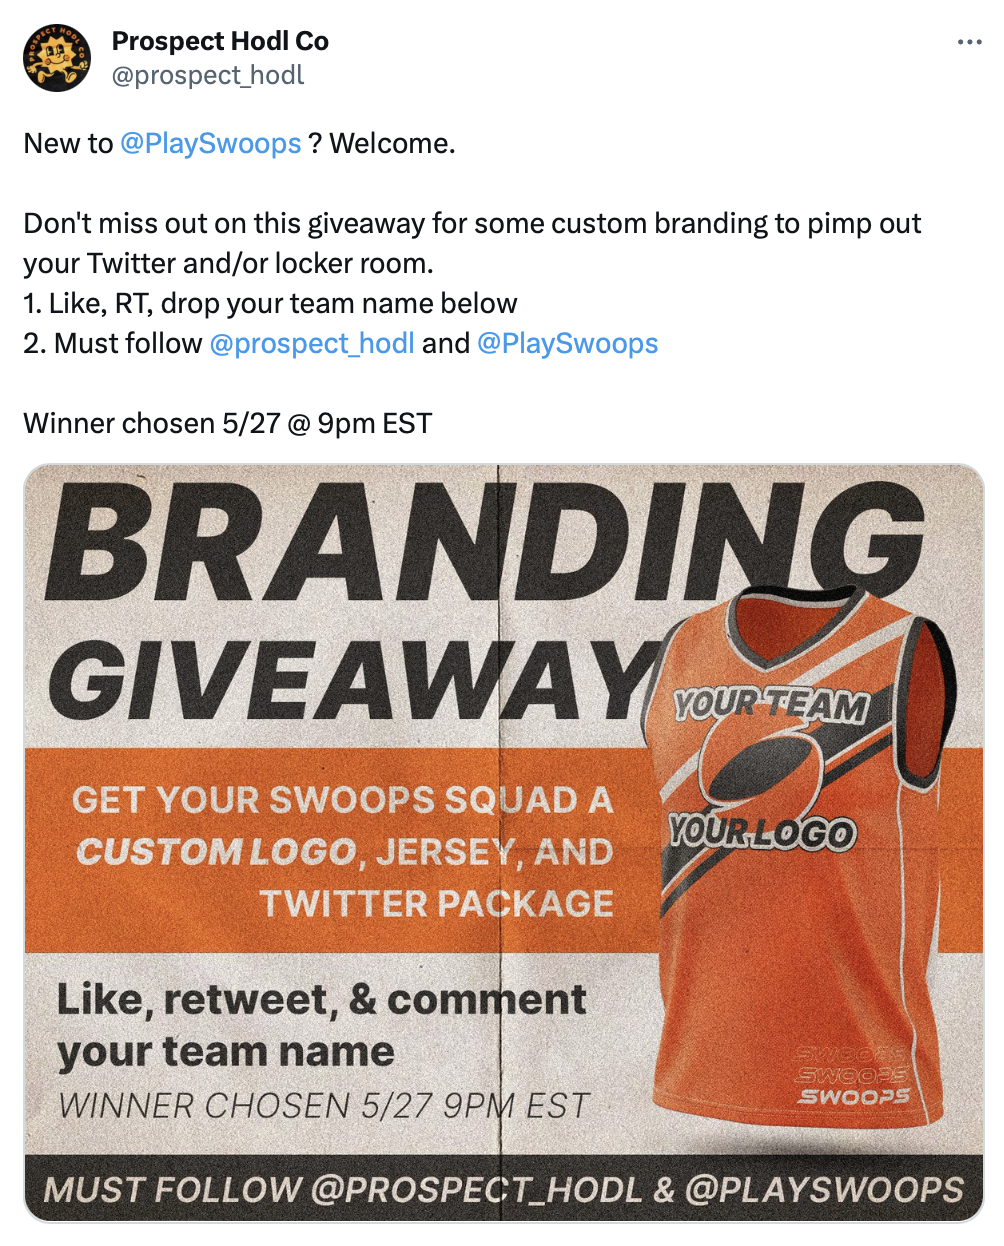 SWOOPS 101: TEAM AND PLAYER BRANDING